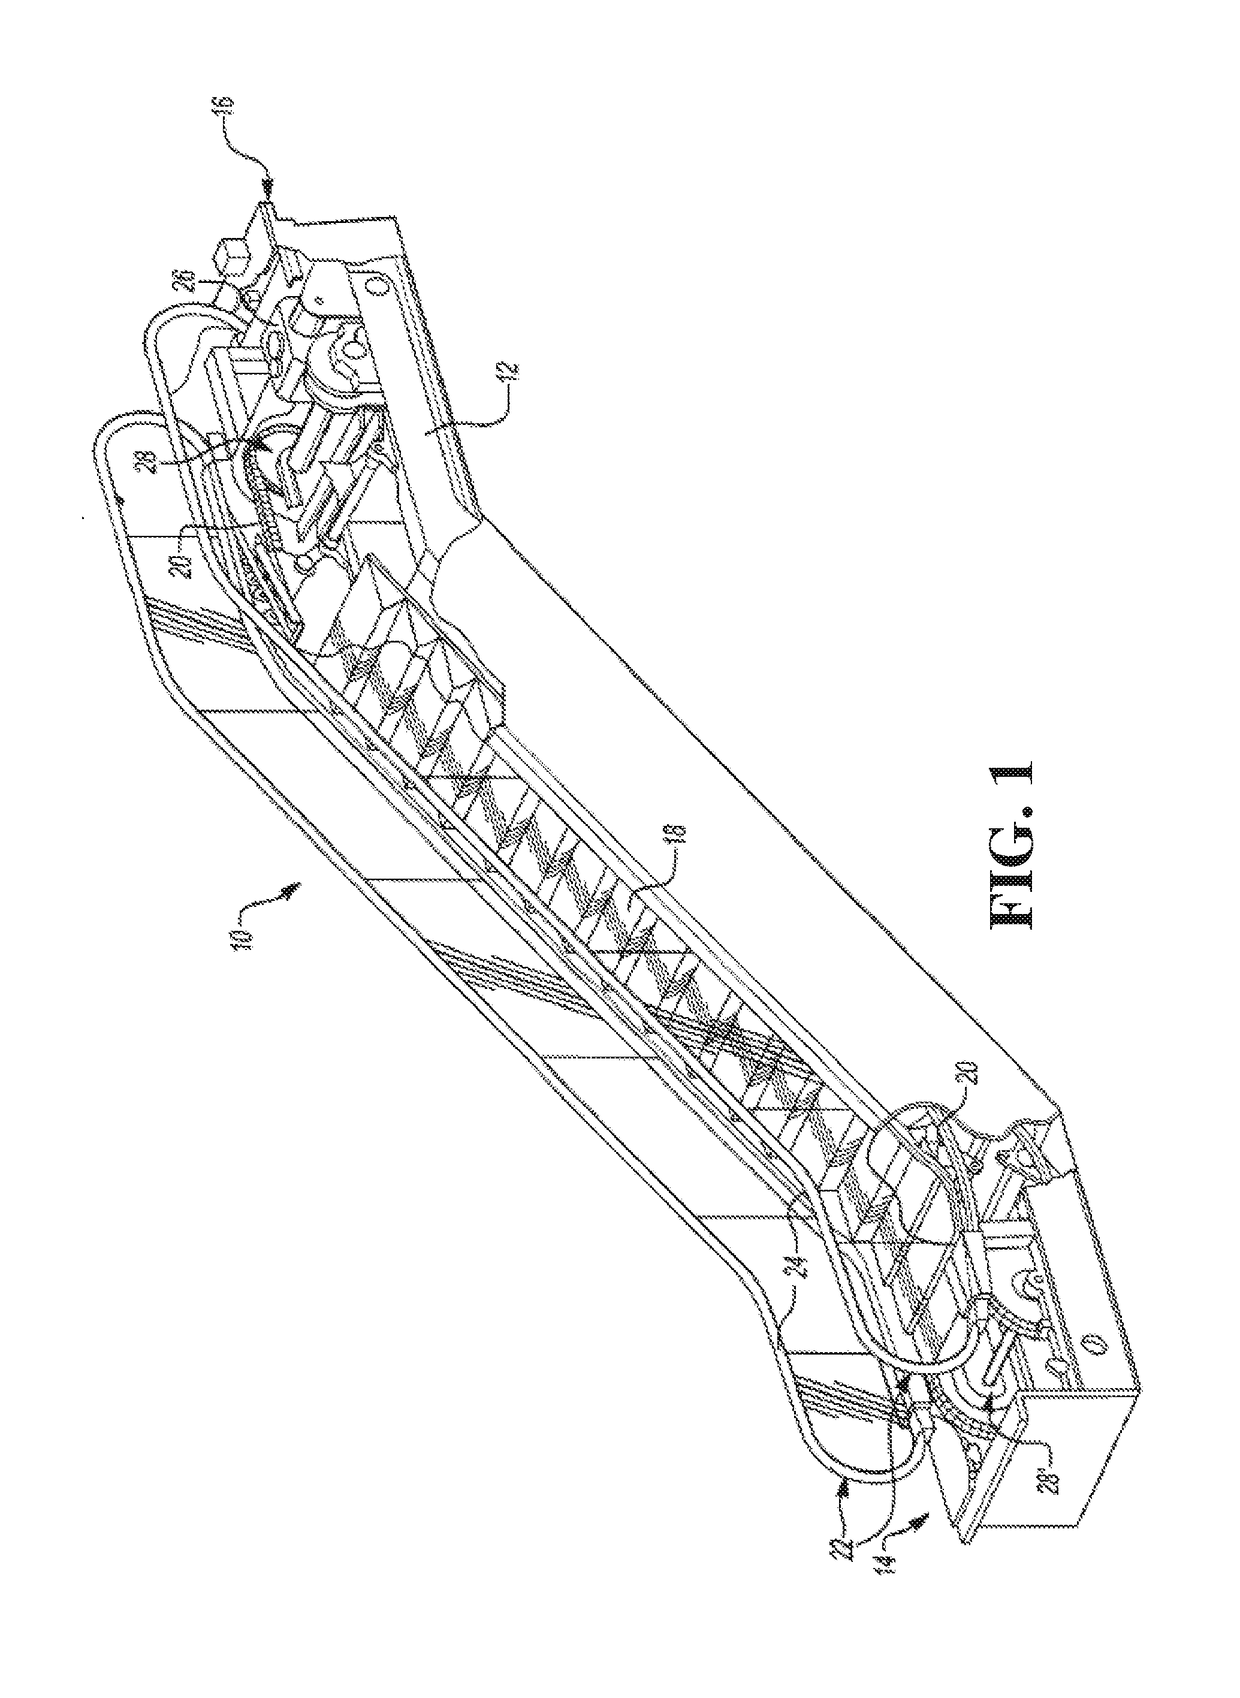 Structural health monitoring of an escalator drive system